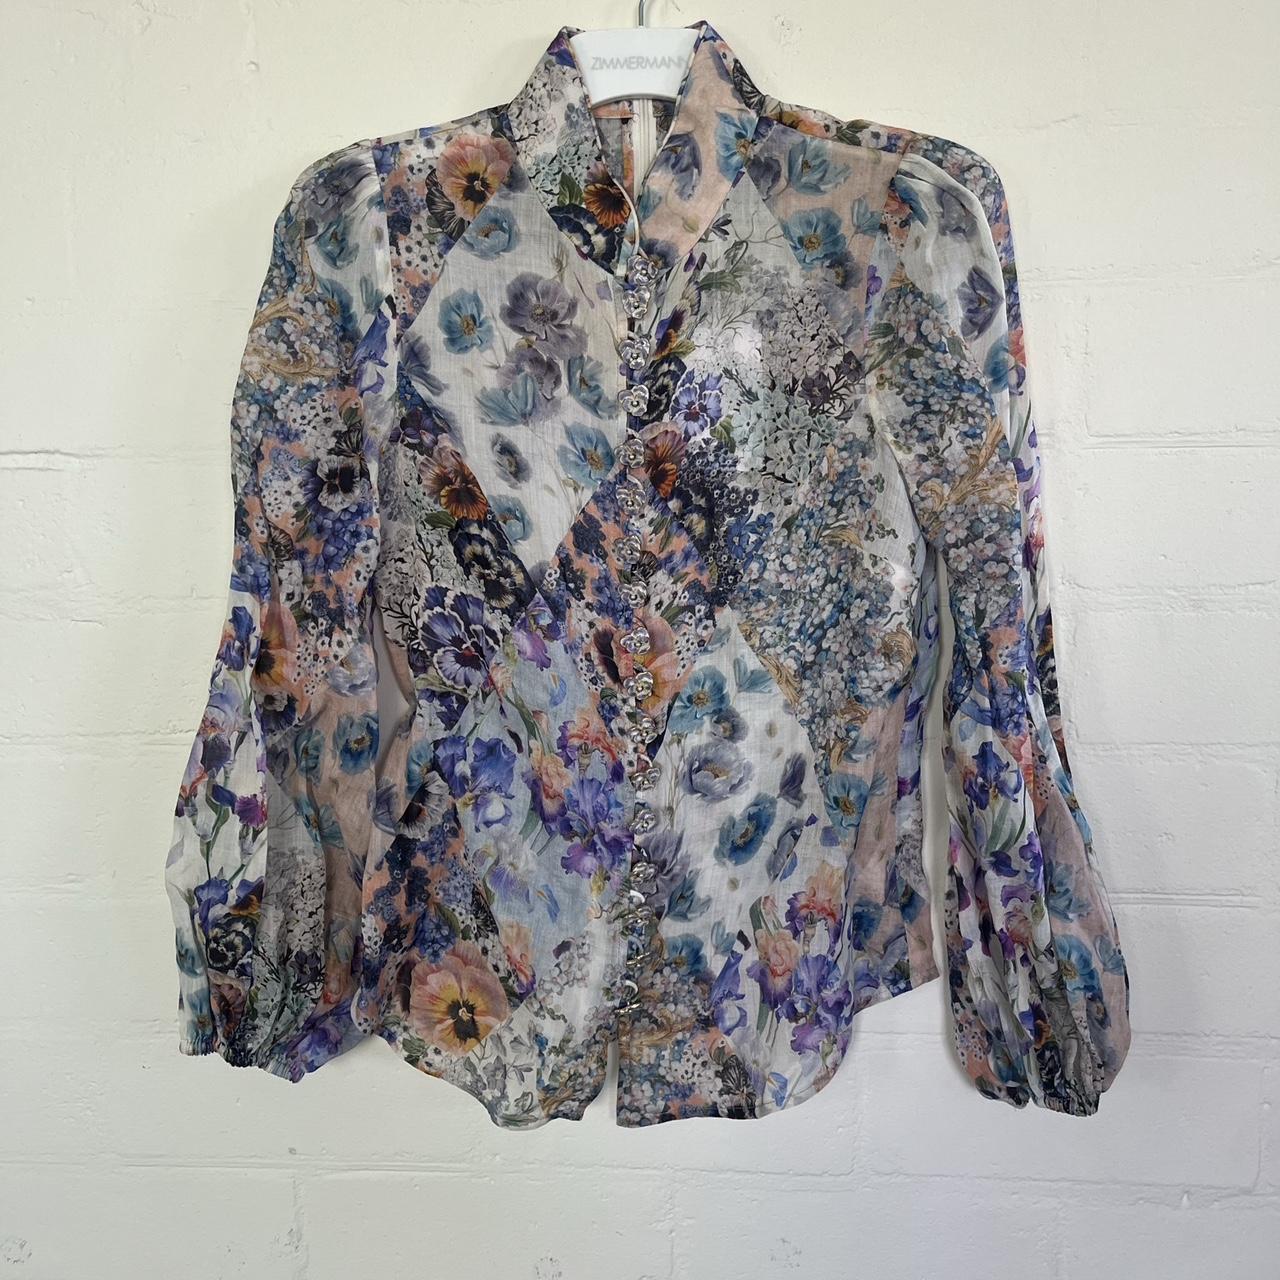 ZIMMERMANN TAMA BUTTON BLOUSE BRAND NEW WITH TAGS ON - Depop